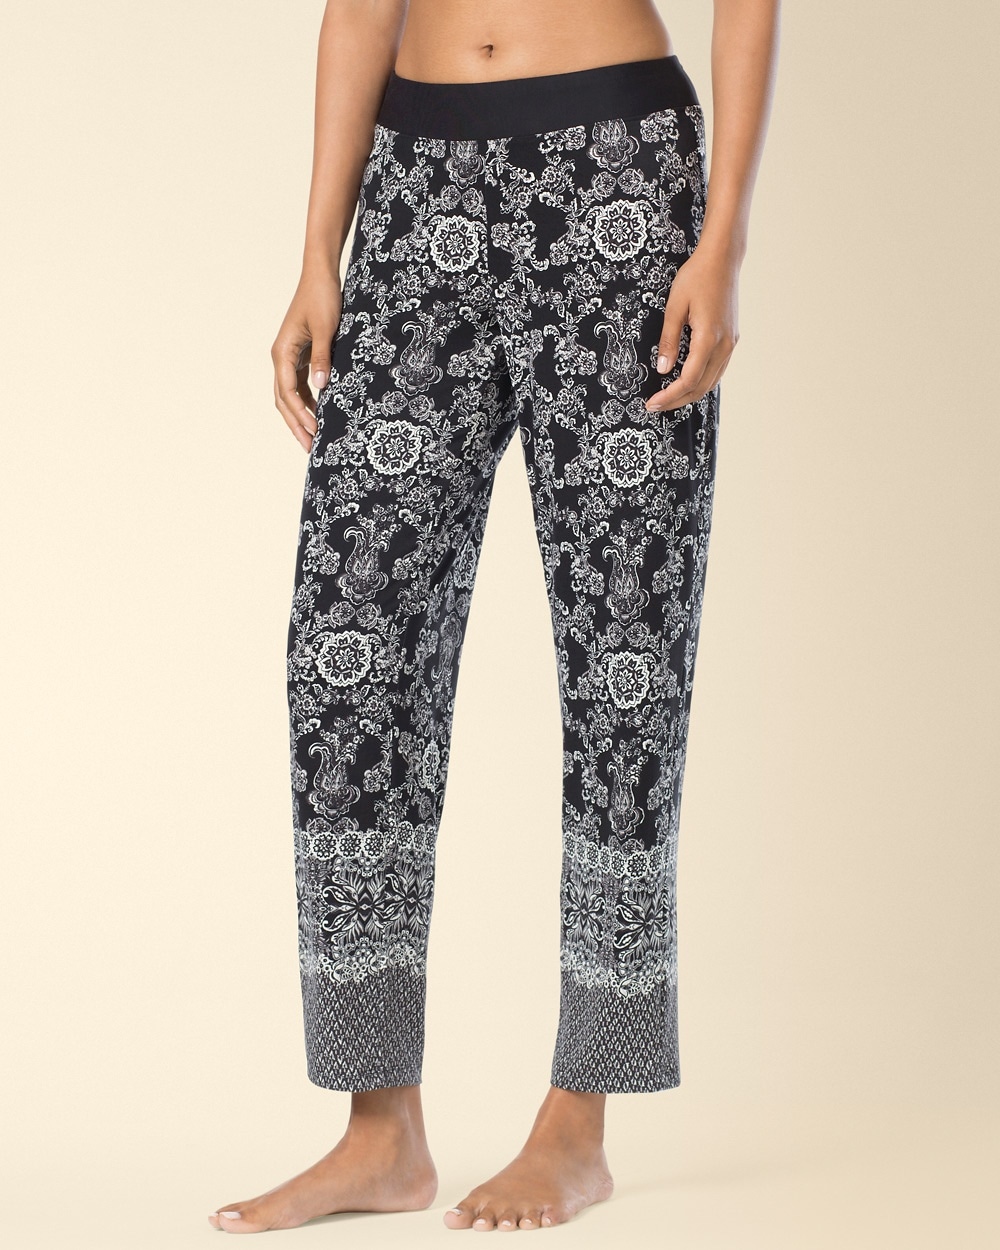 Charmed Collection Ankle Pajama Pant Dainty Floral Border